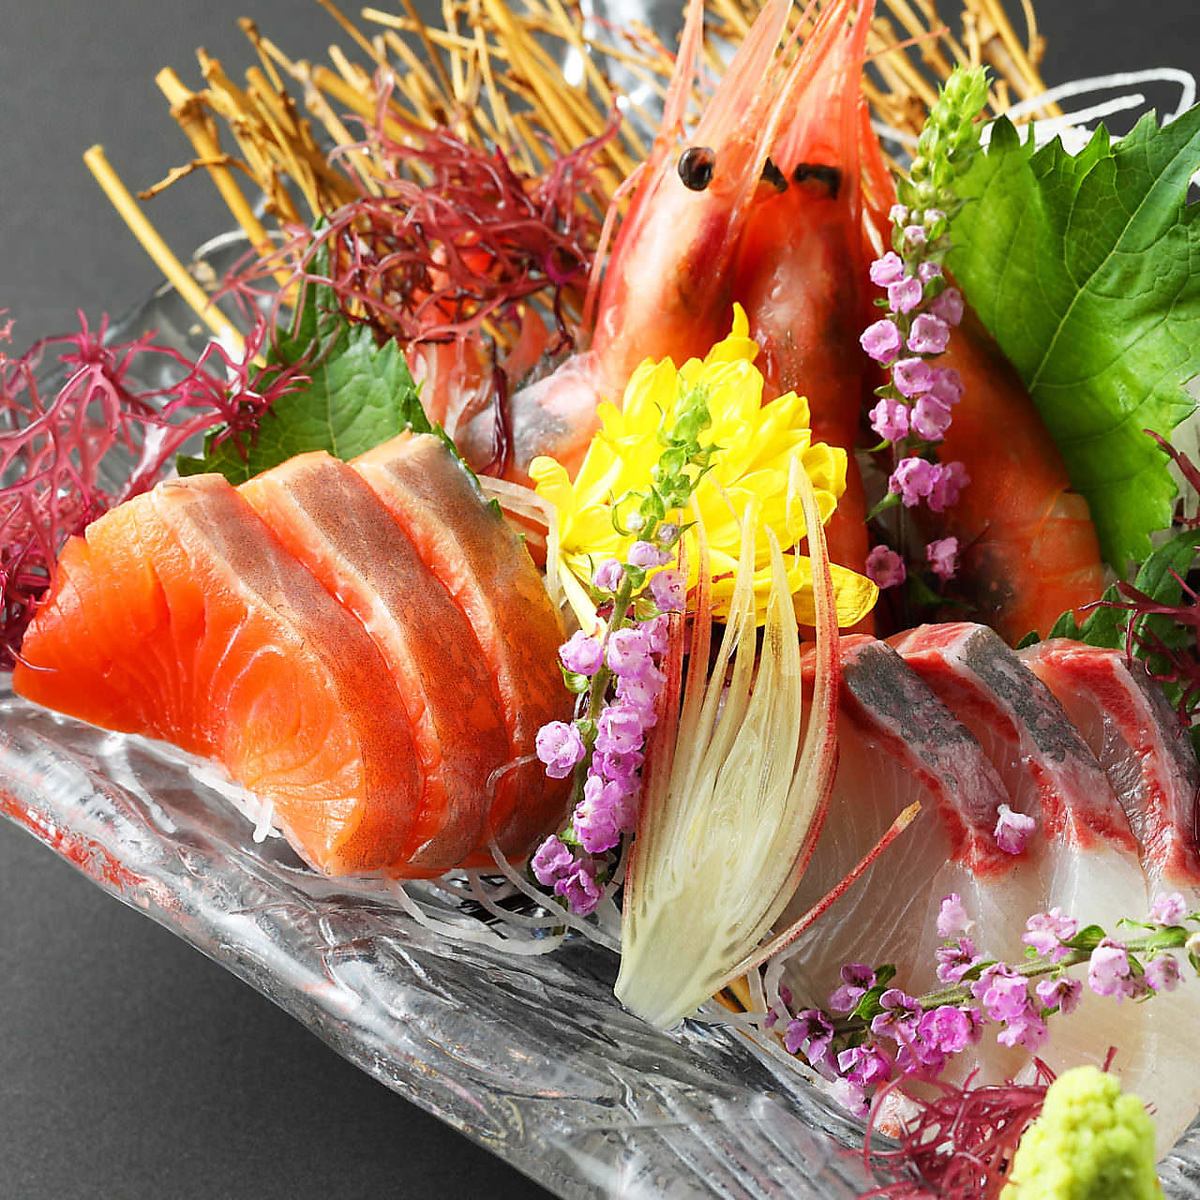 A plate of seasonal fish delivered directly from the morning! Super fresh sashimi is also available for just 299 yen!